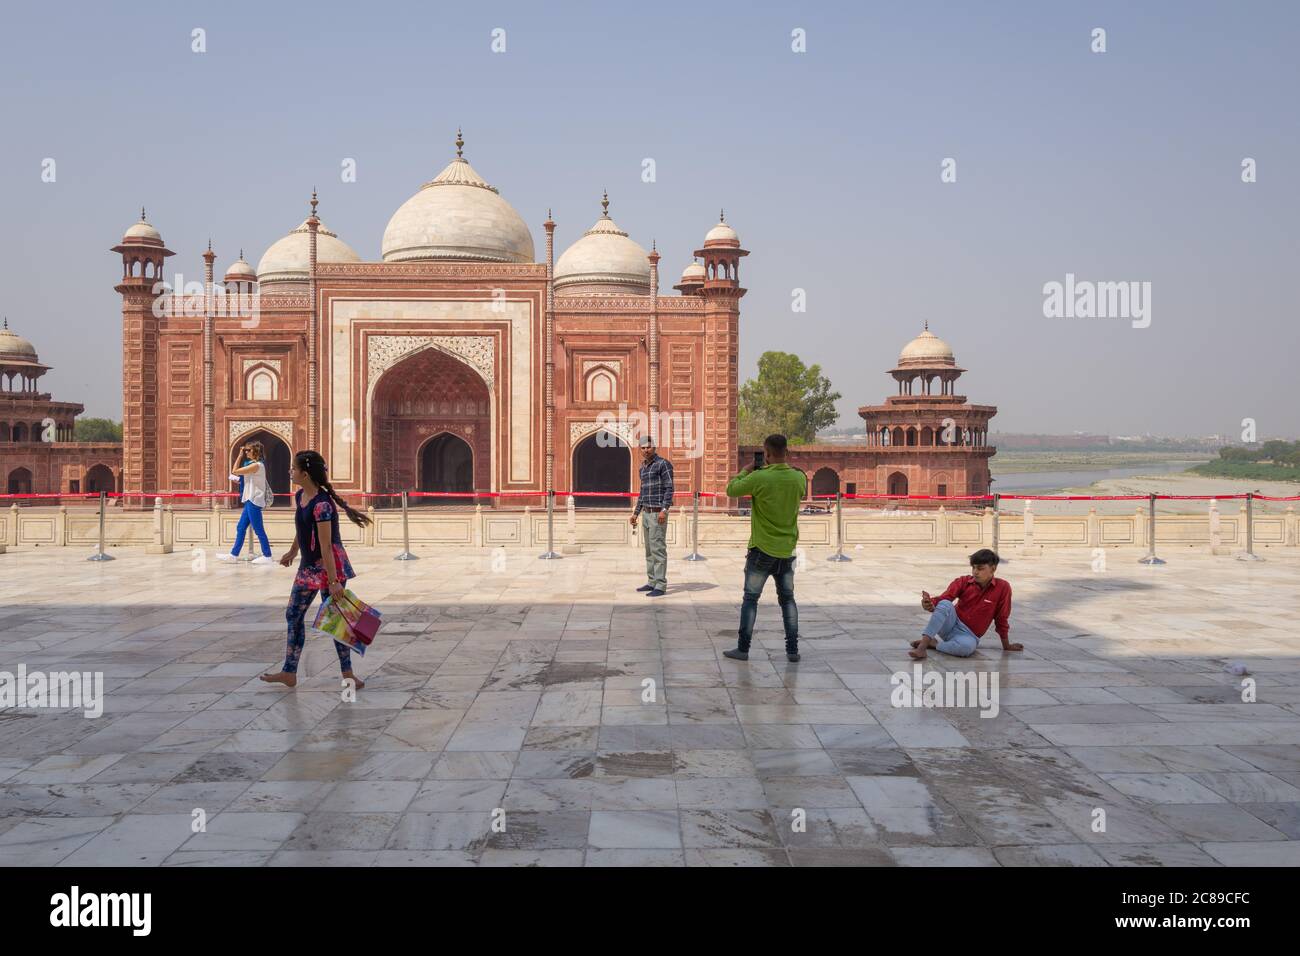 Visitors in front of outlying mosque facing the Taj Mahal, on southern bank of River Yamuna in Agra, India Stock Photo